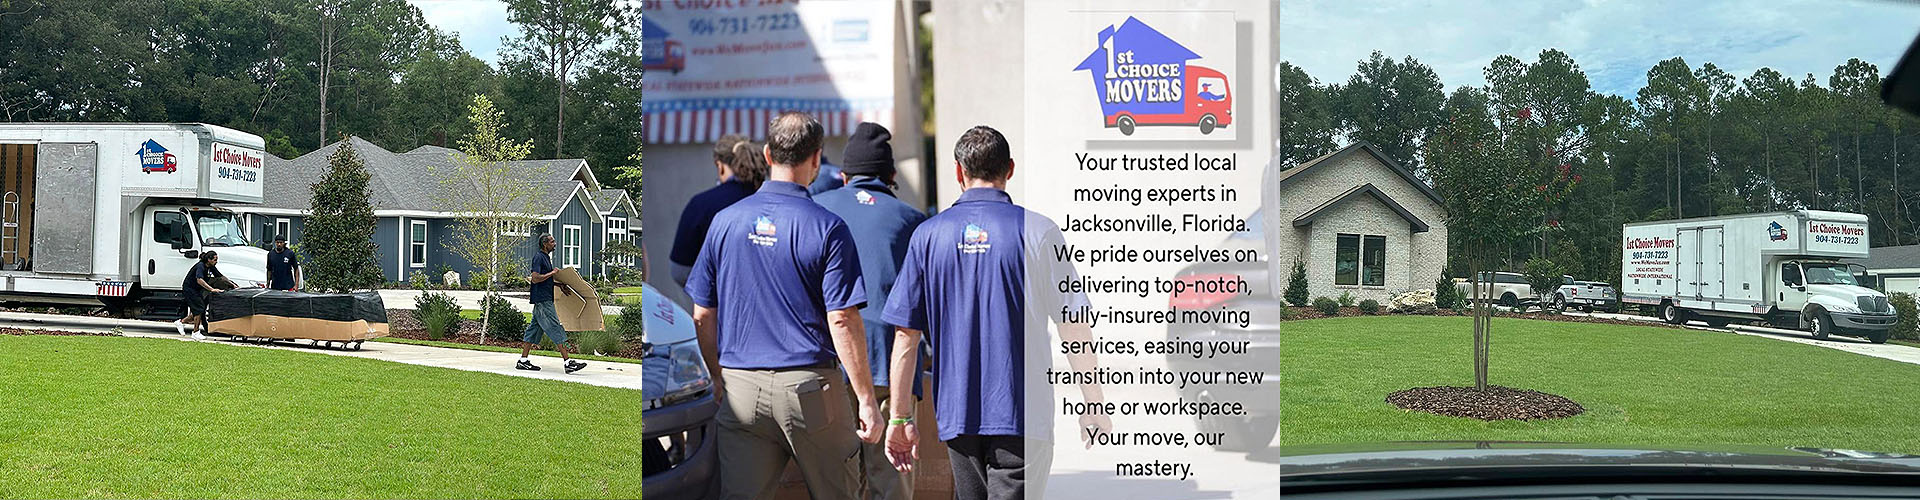 Discover the experienced team behind our successful moving services.